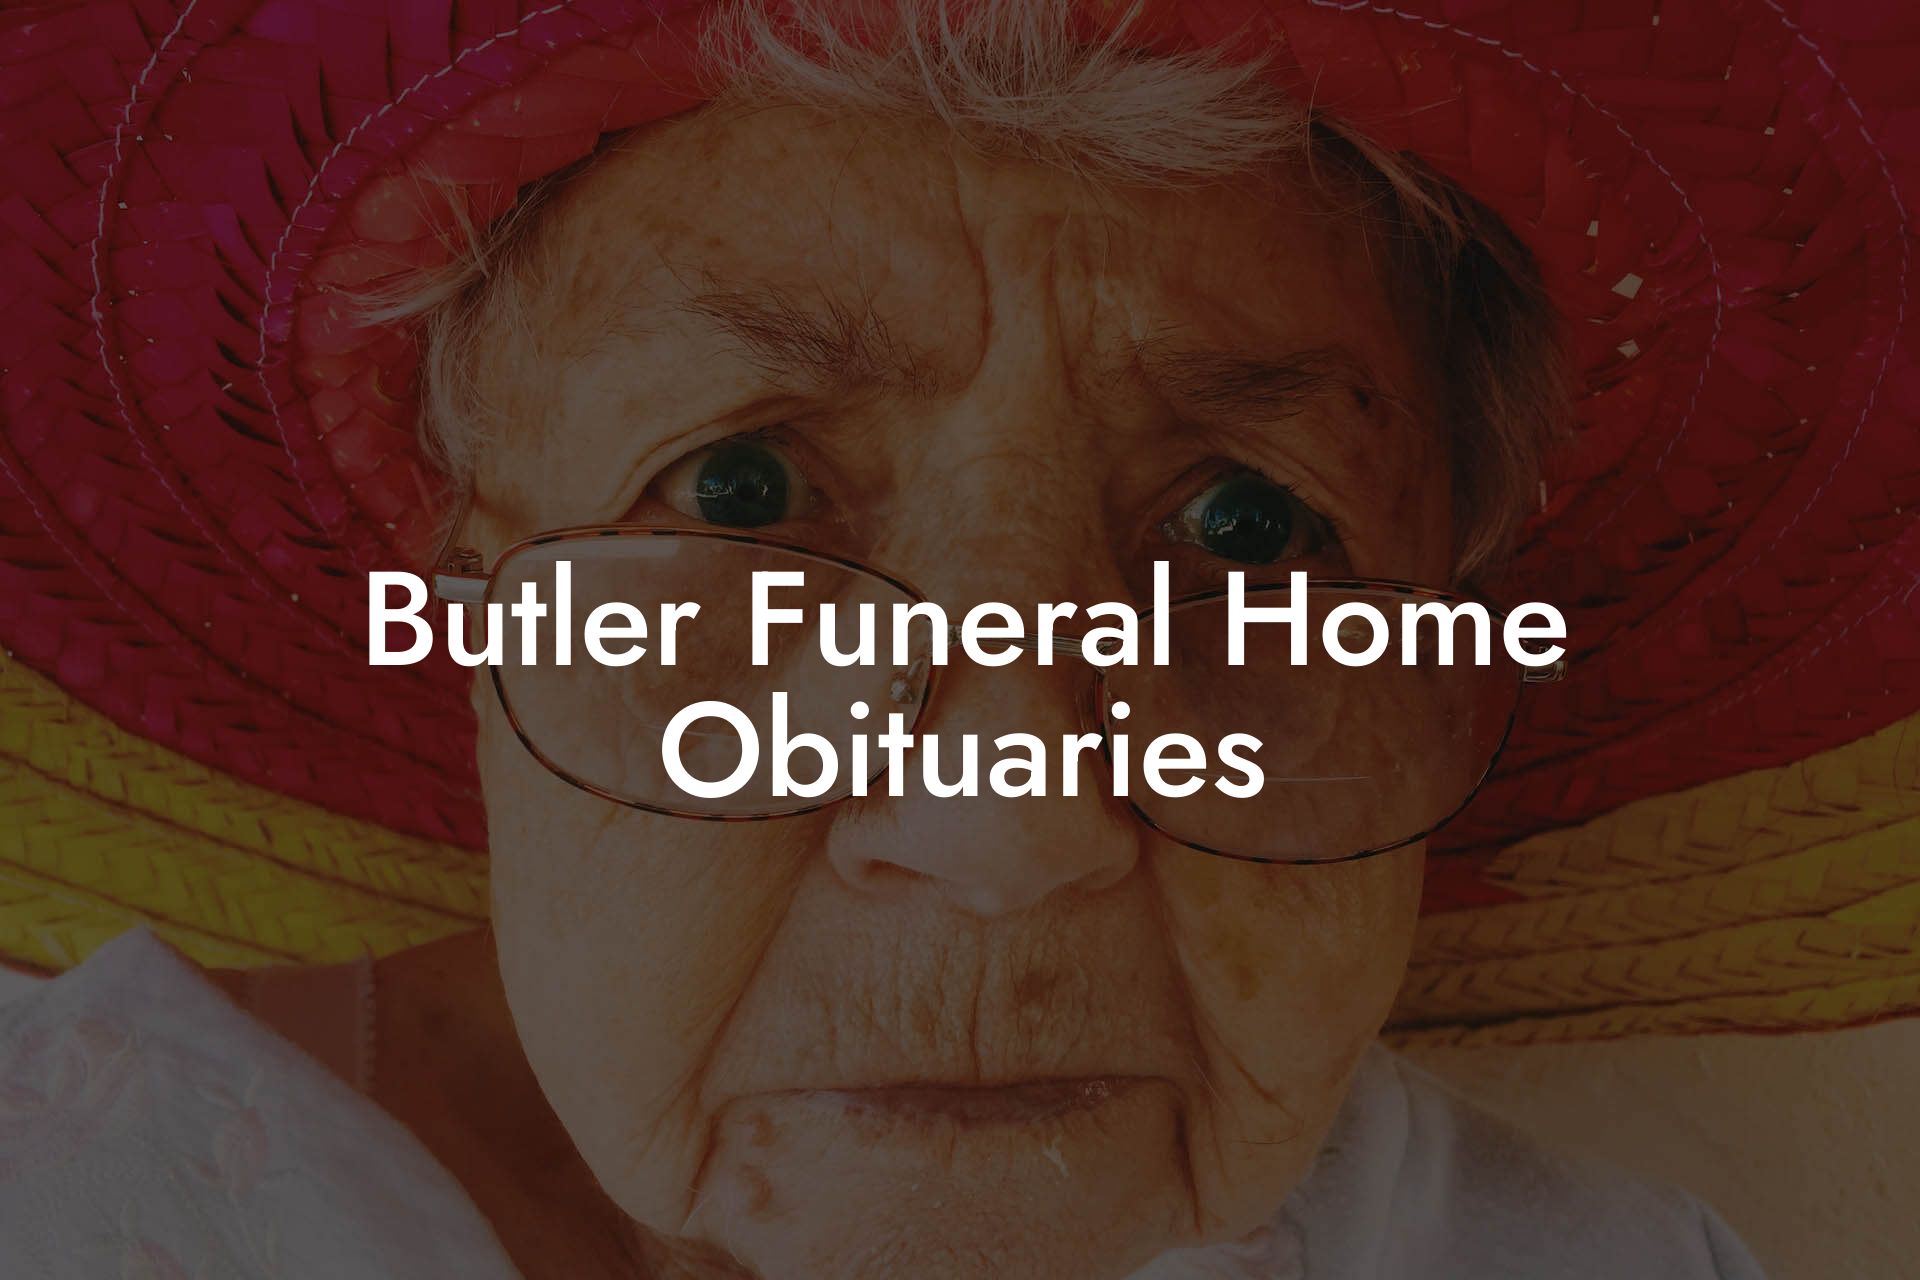 Butler Funeral Home Obituaries